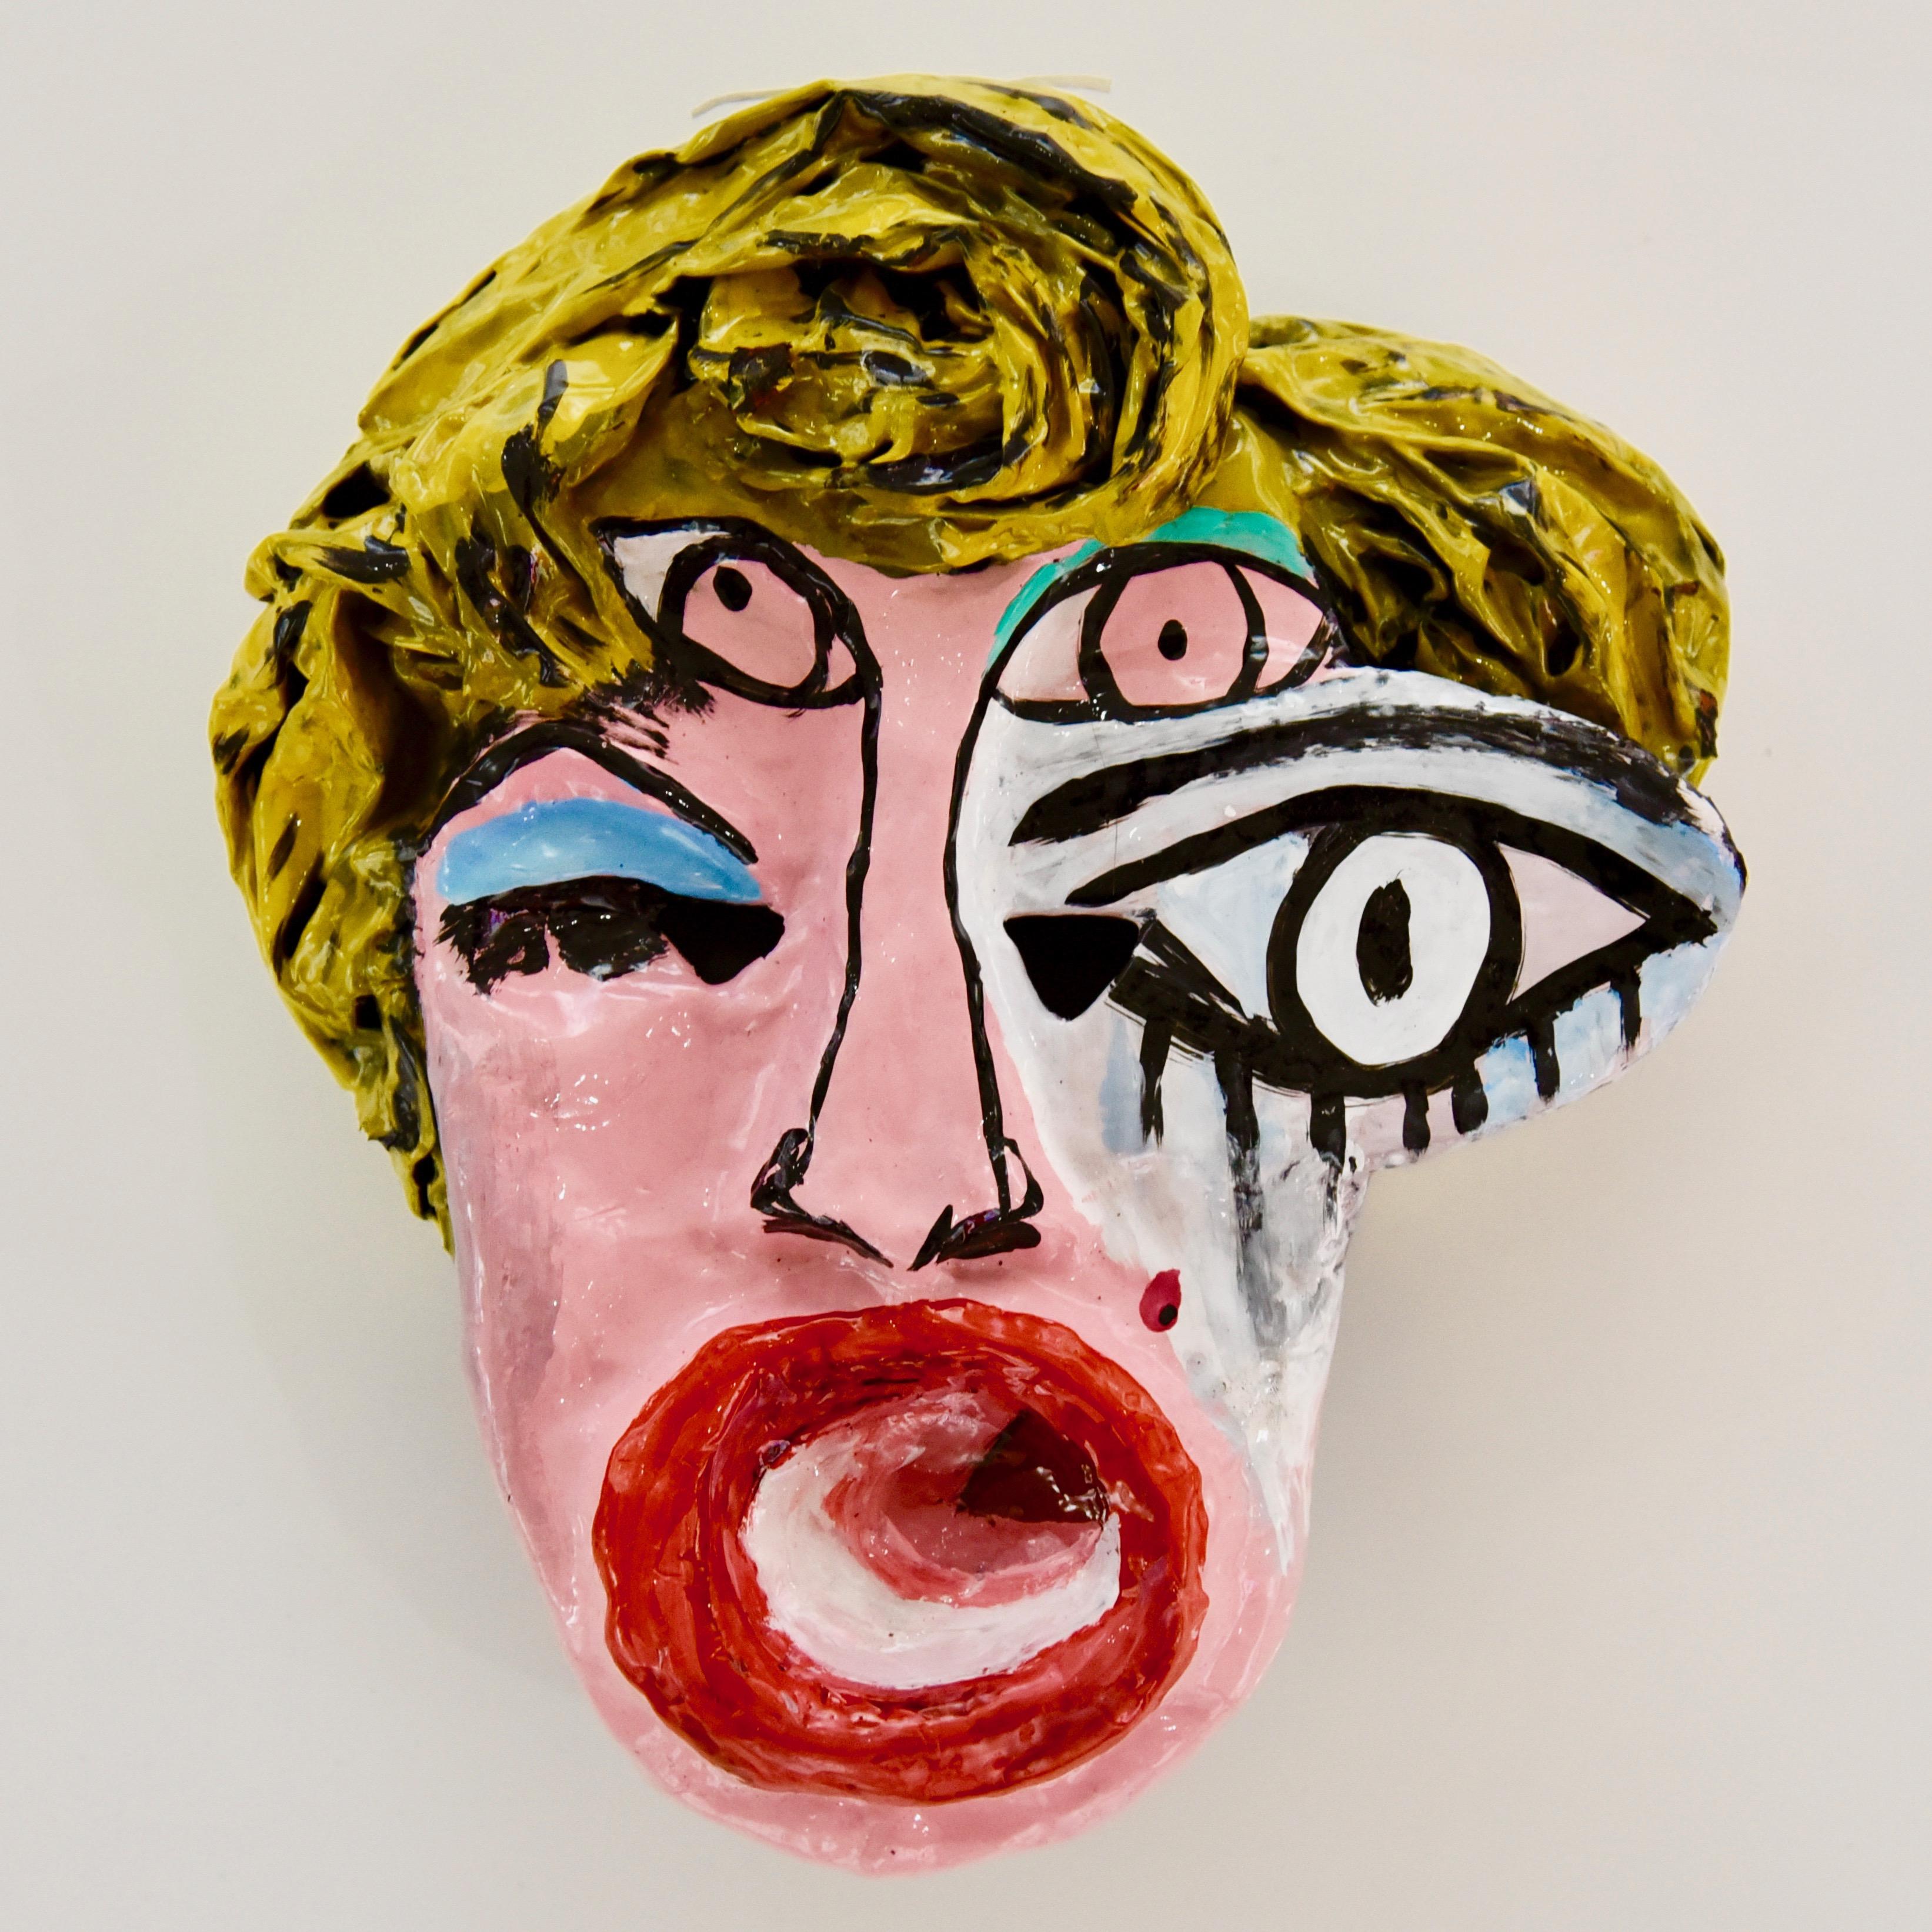 One of a kind collectible mask by John Paul Fauves 
Acrylic over paper mache


ABOUT THE ARTIST: 
John Paul Fauves (born in 1980) is a contemporary Artist from Costa Rica . His artistic journey started at a very young age after he became a student